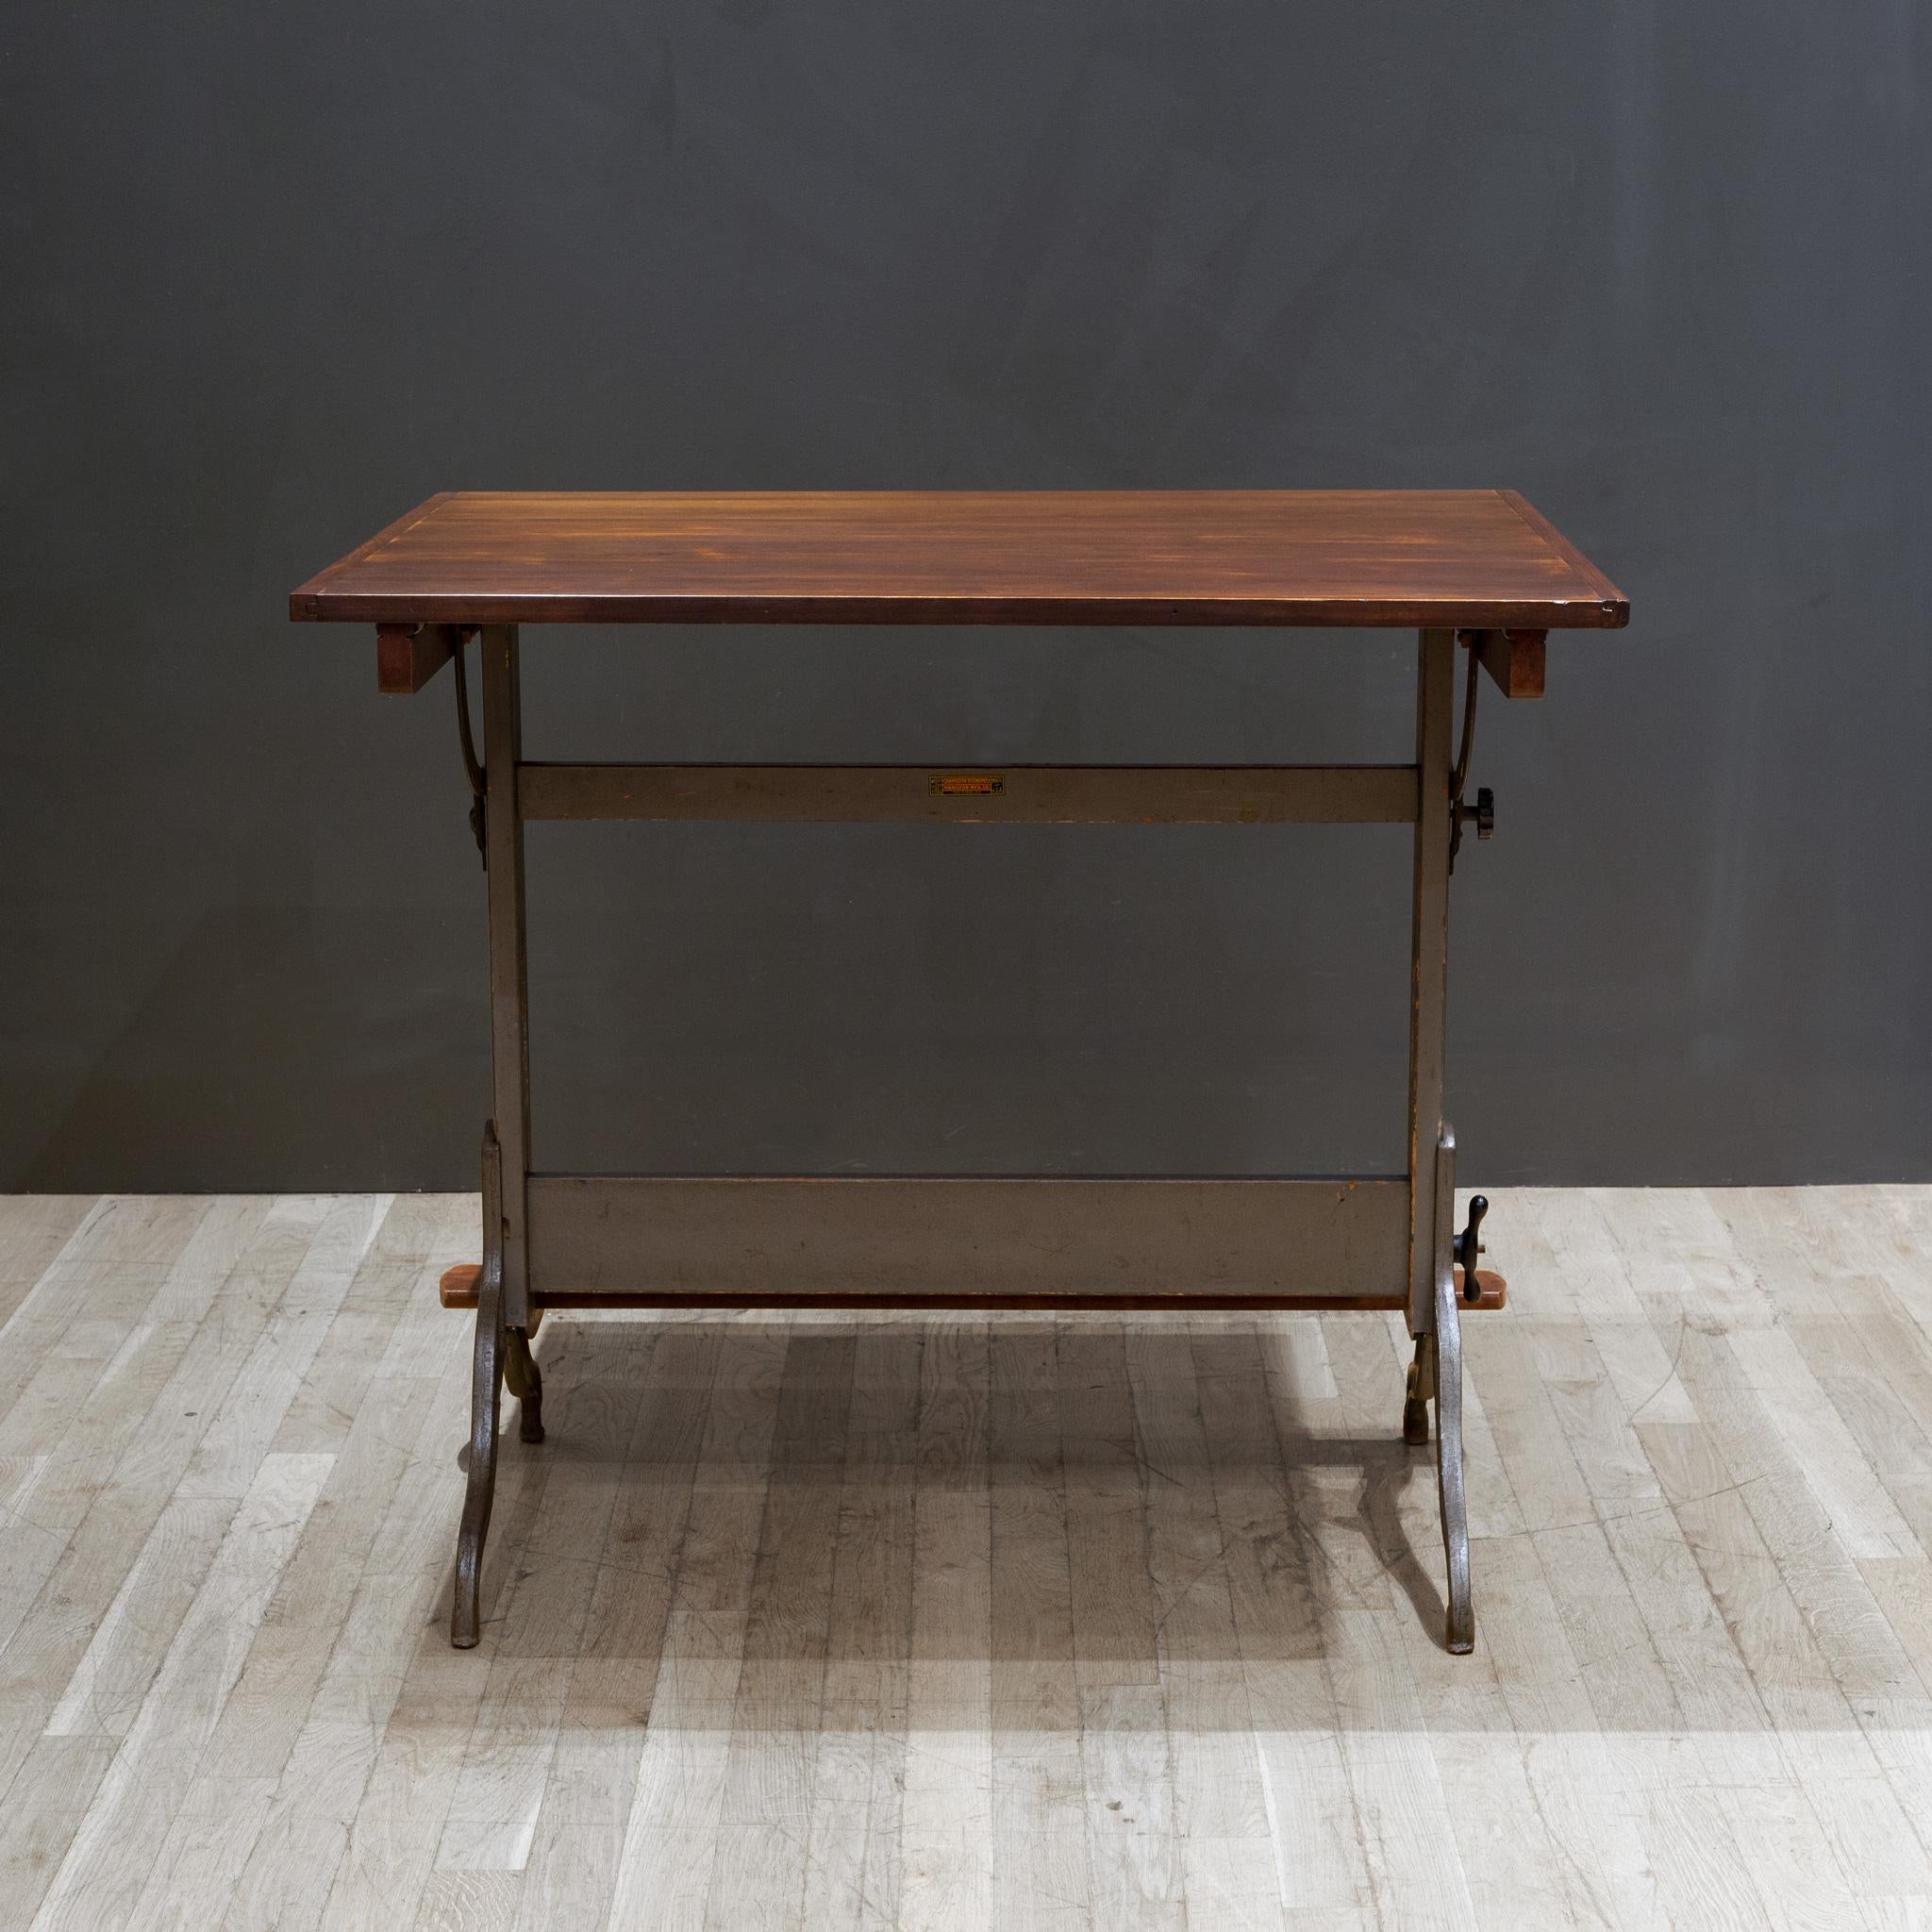 Steel Antique Hamilton Mfg. Co. Drafting Table with Footrest c.1930 For Sale